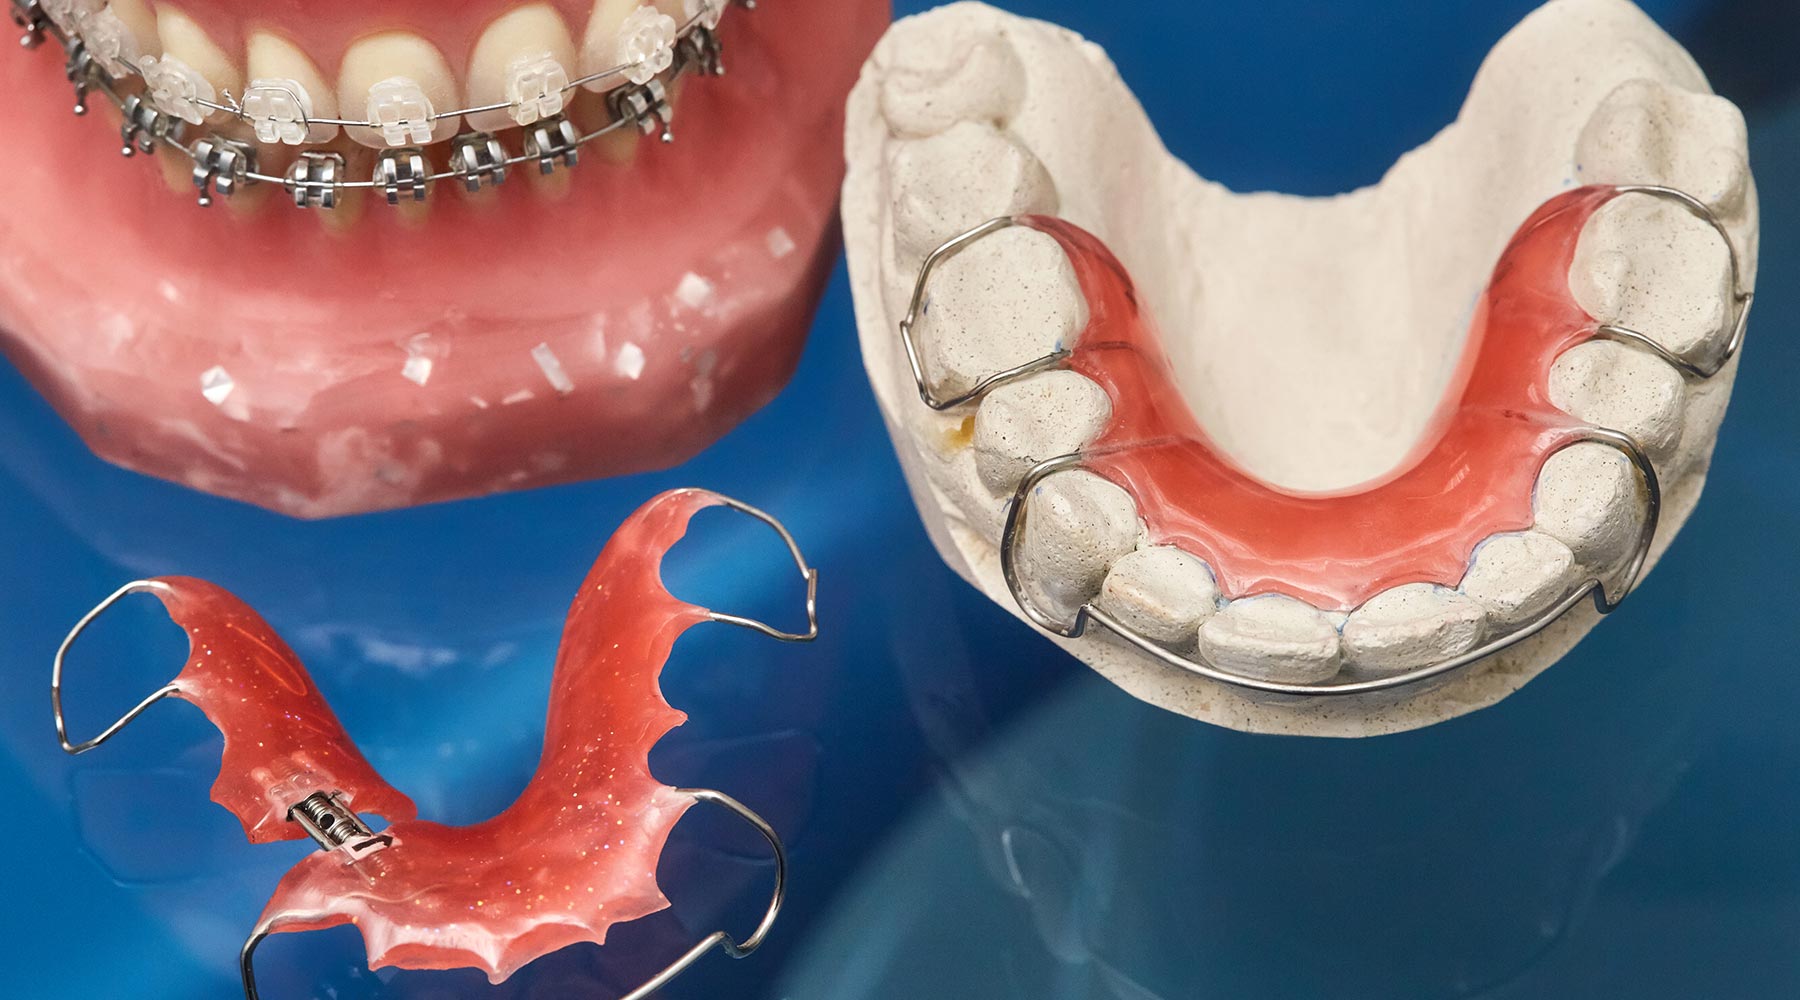 Can retainers straighten my teeth if they’ve relapsed?